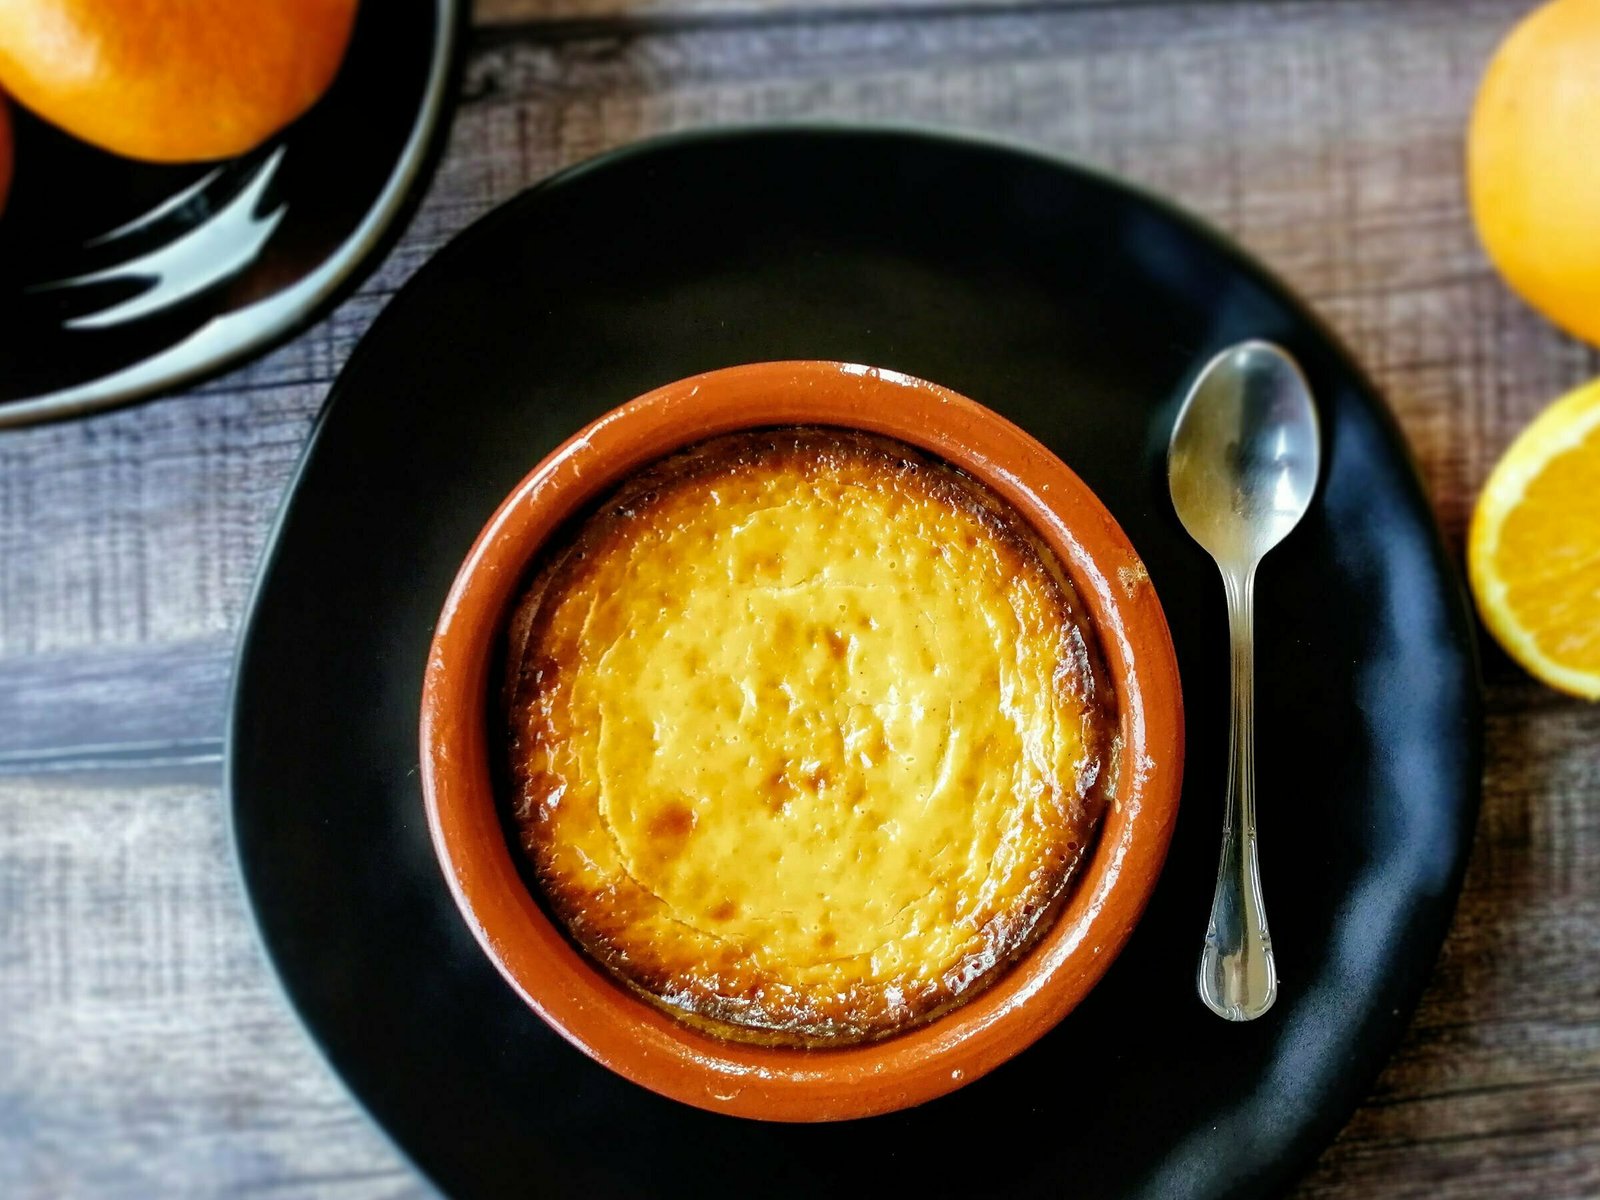 a plate of baked cheesecake with hoey and orange ists on a wooden countertop